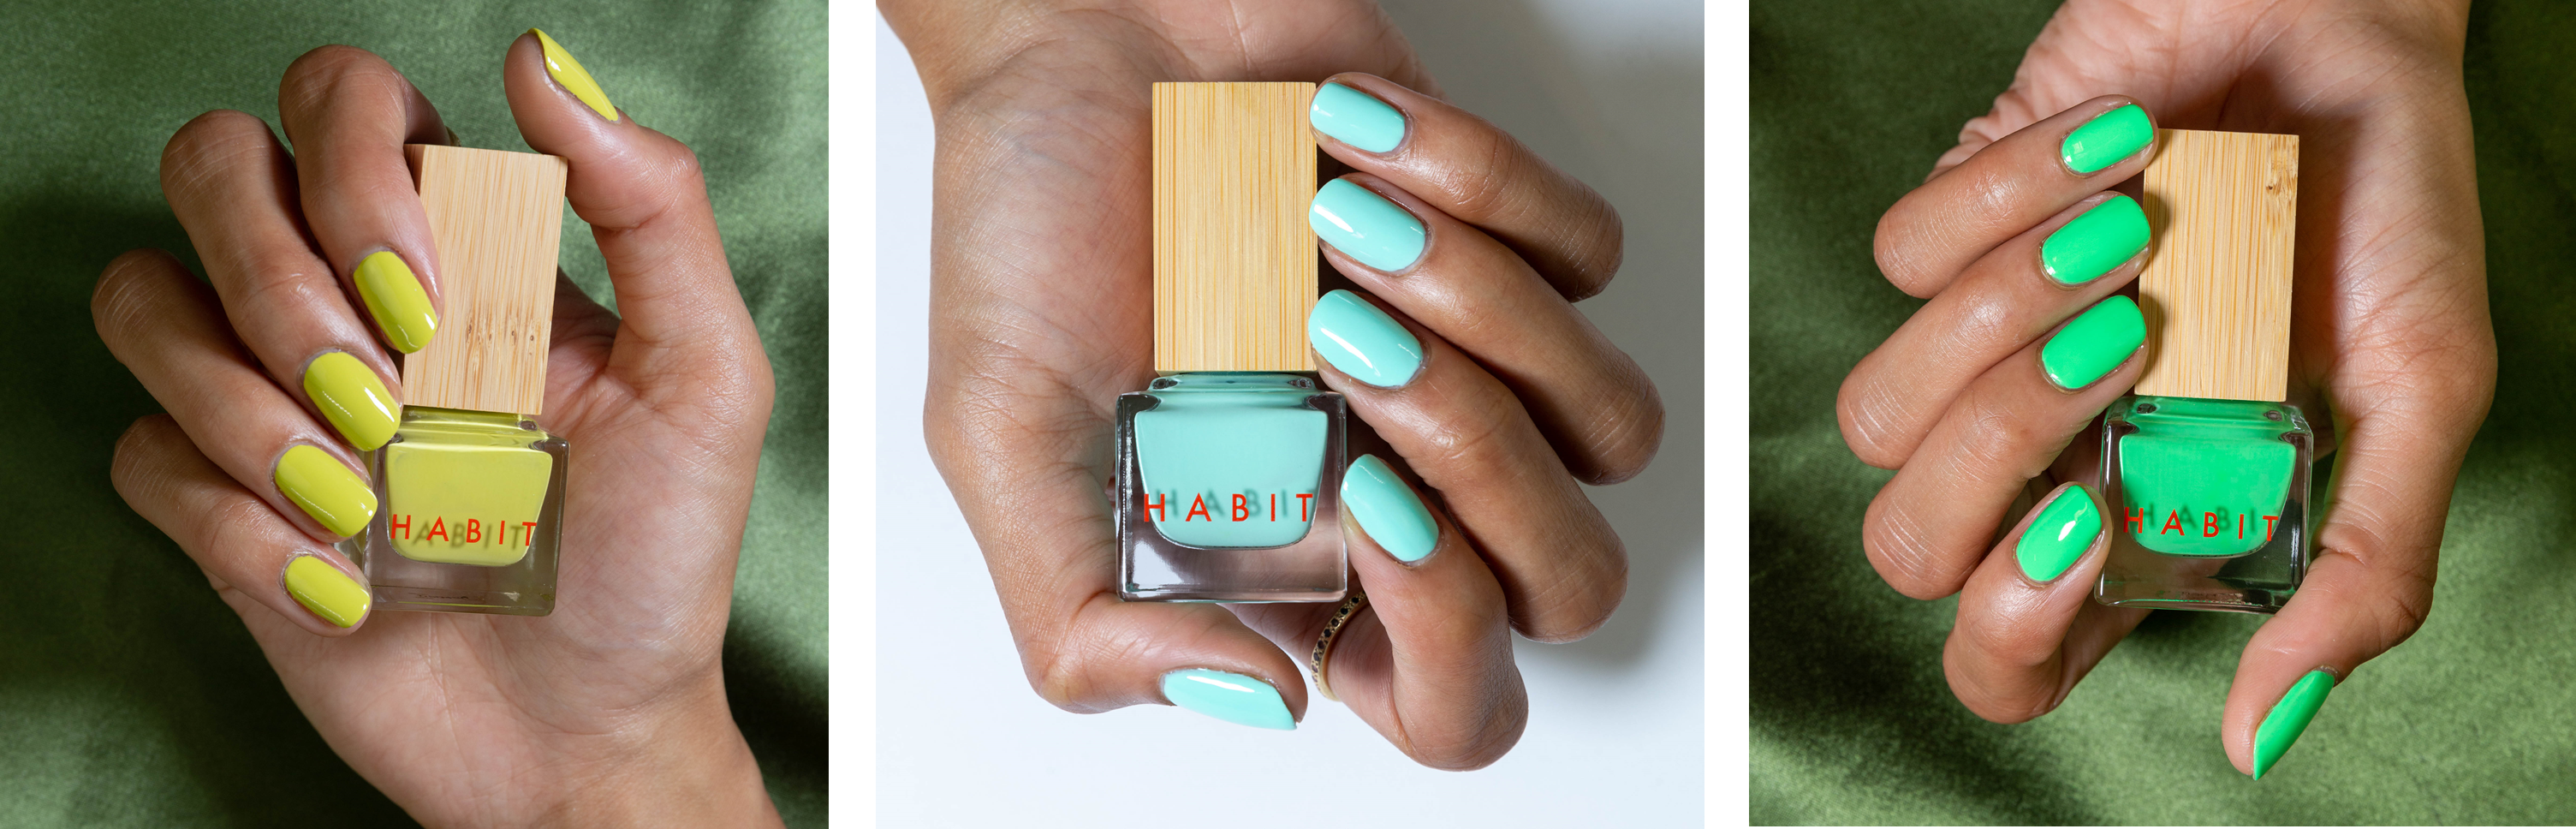 Habit Cosmetics, Tuesday, February 23, 2021, Press release picture